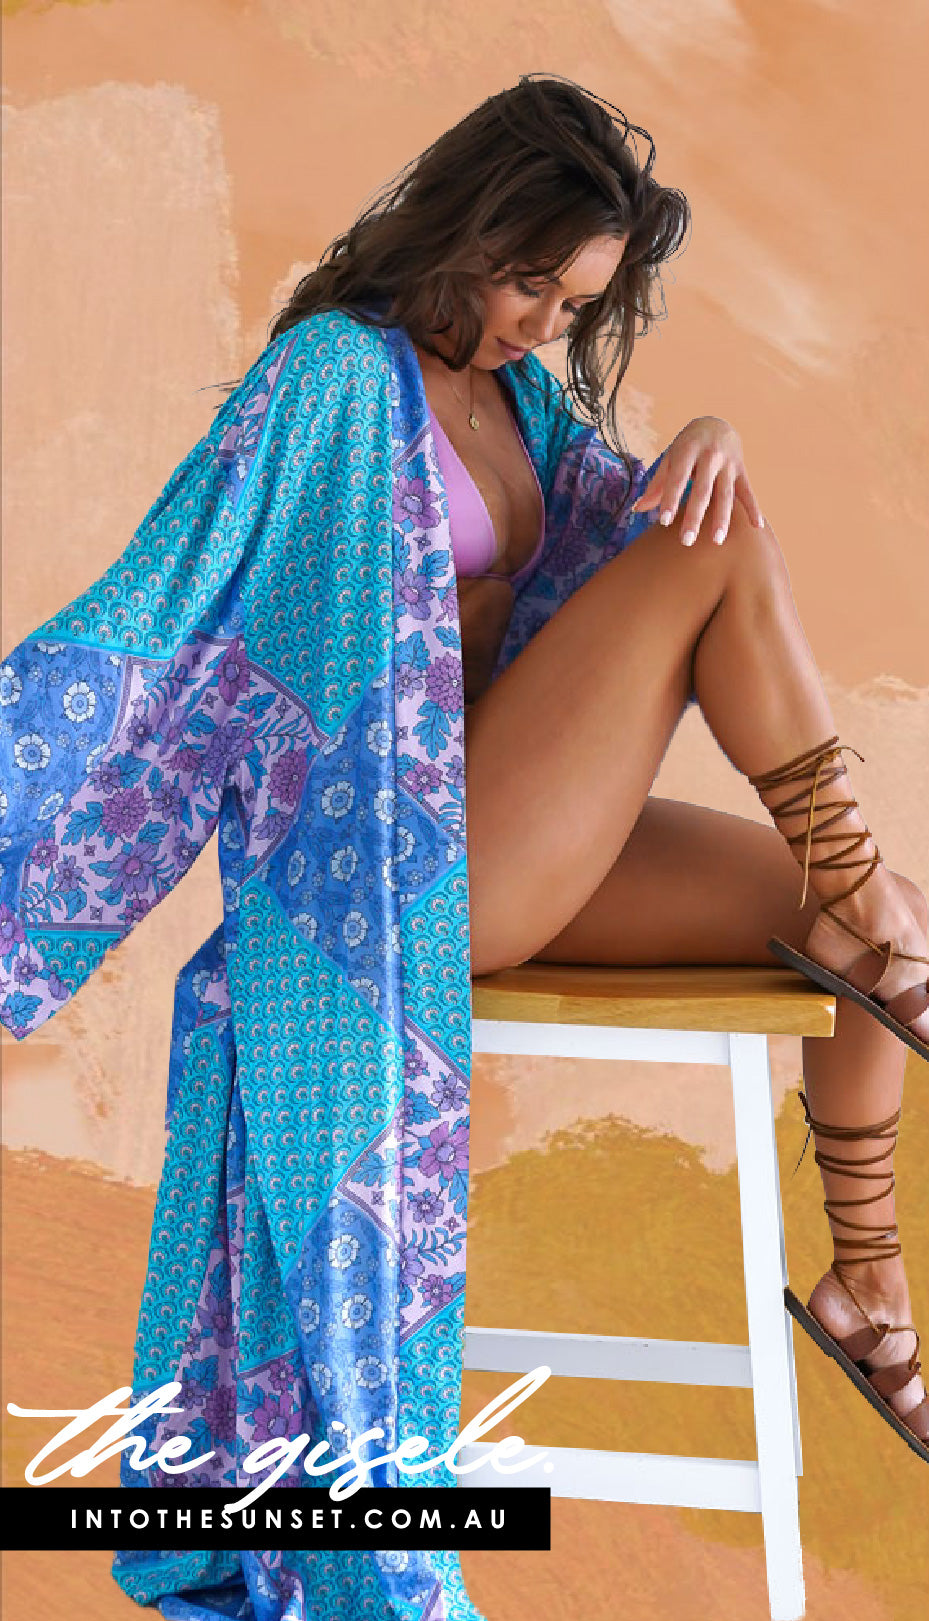 Photo - model wearing a printed kimono/robe from our loungewear collection.